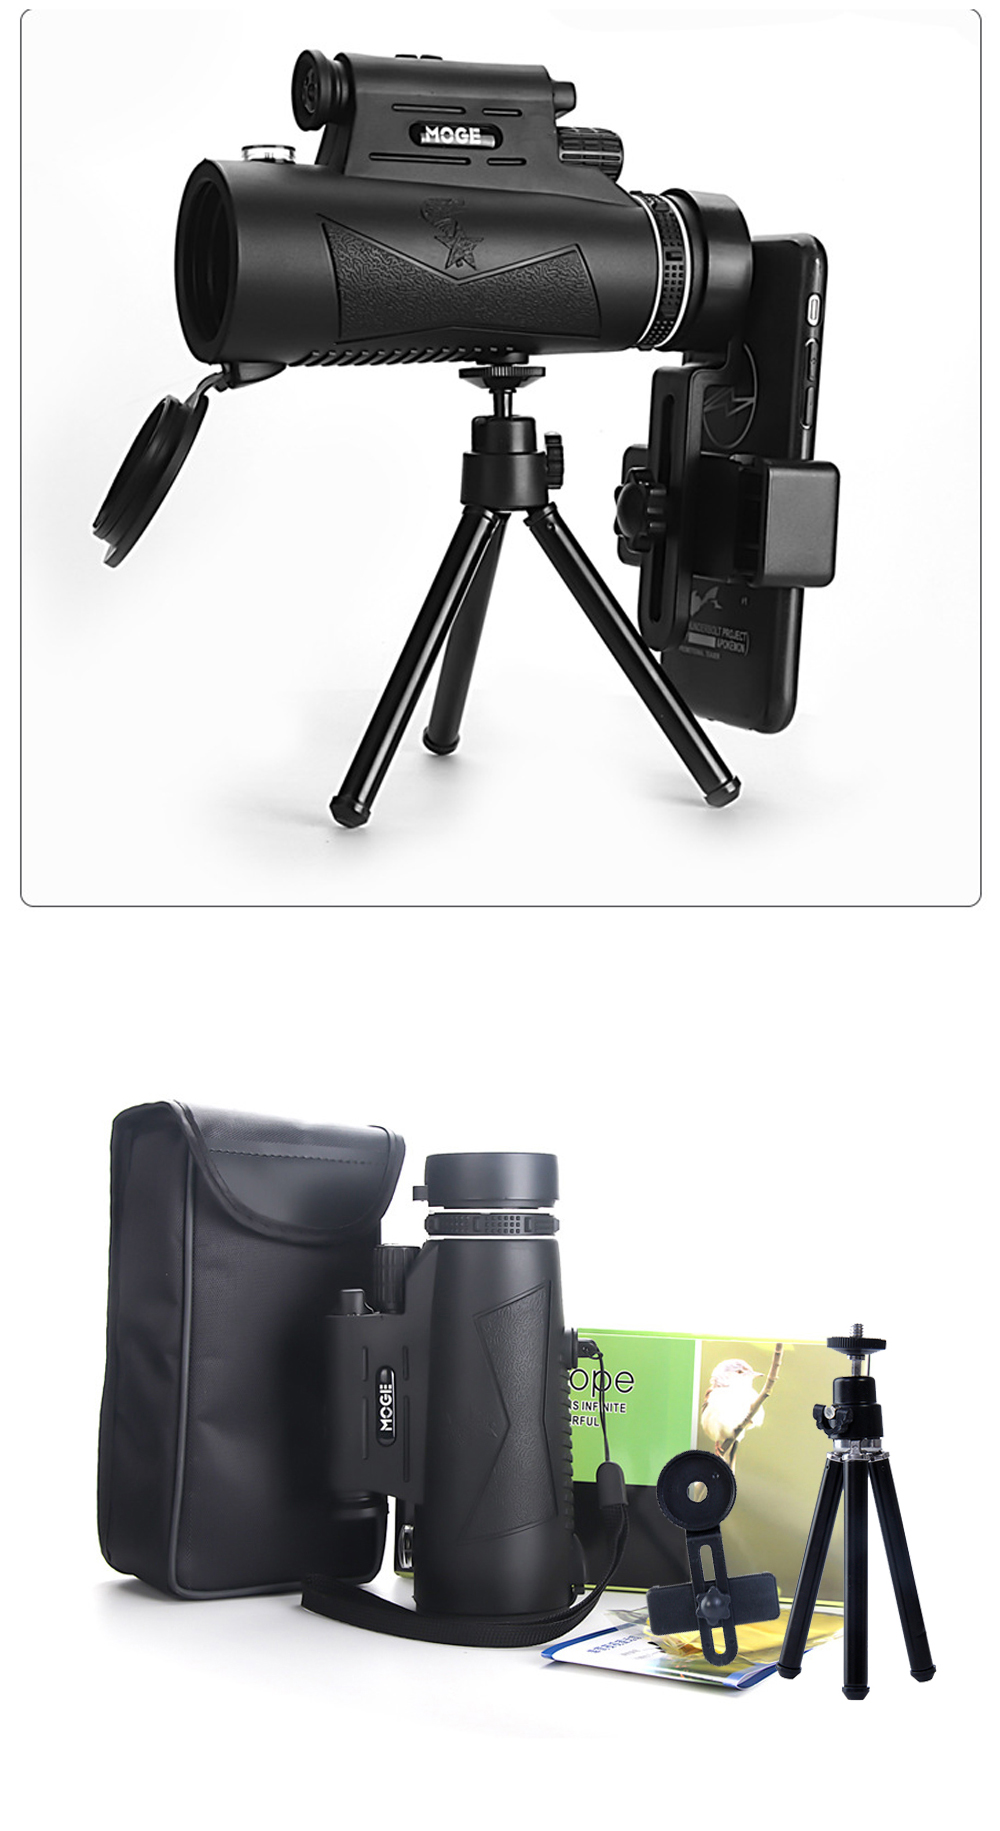 Moge-12X50-HD-Telescope-with-Laser-Flashlight-Phone-Adapter-Tripod-For-Outdoor-Camping-Travel-High-P-1838772-5